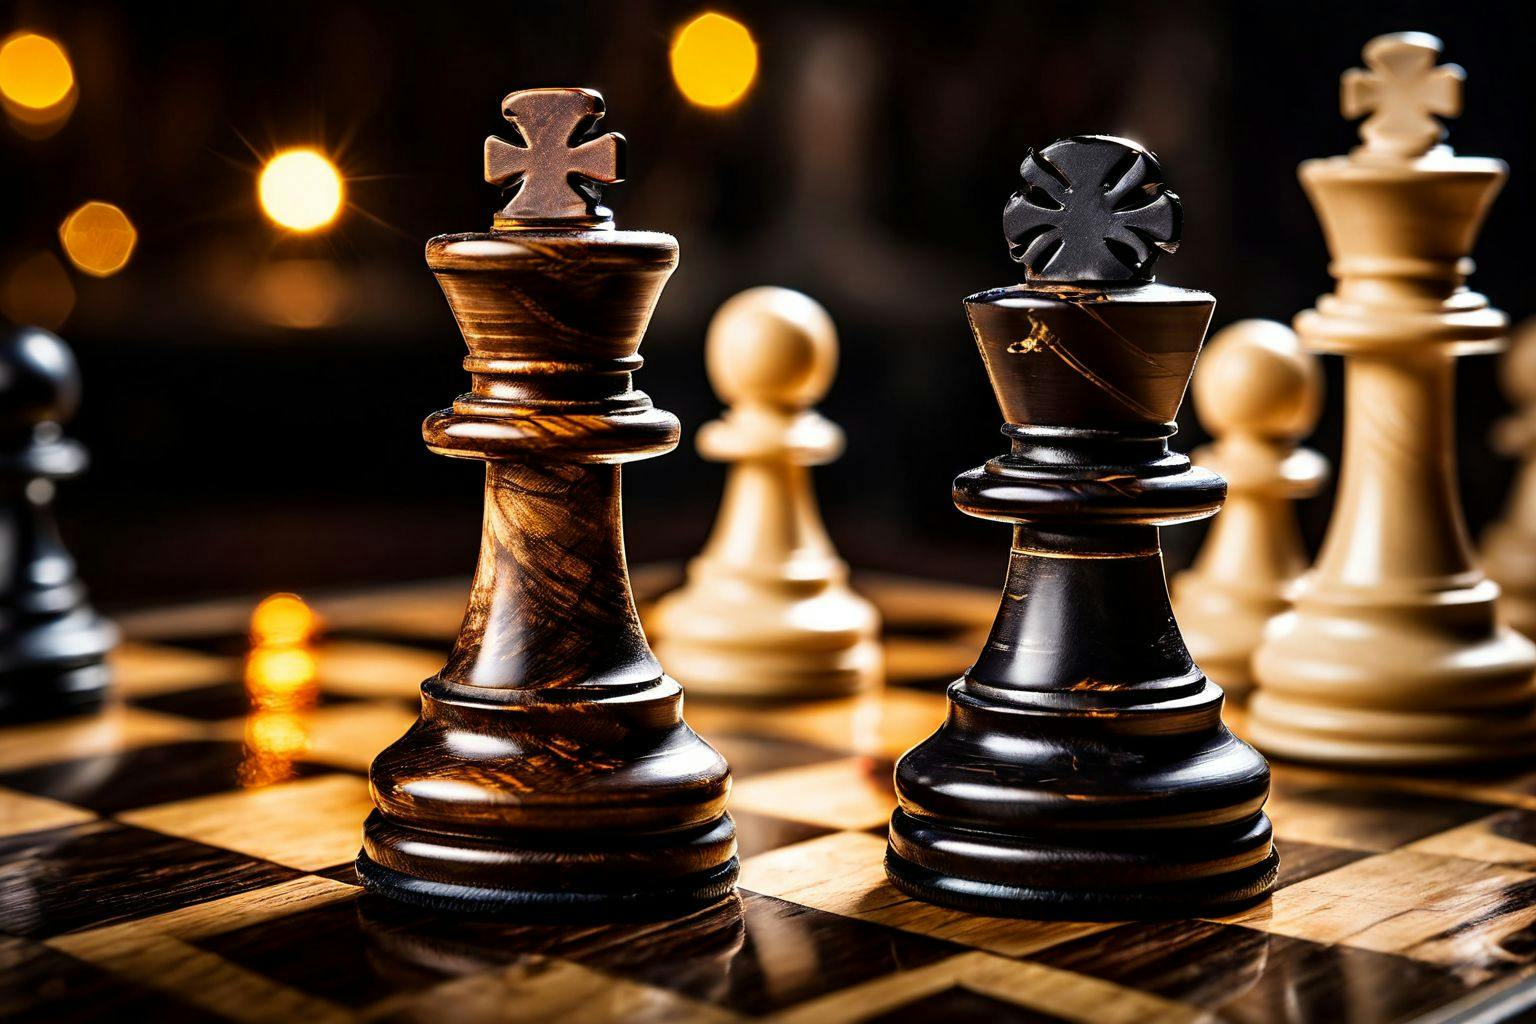 Two chess pieces facing each other on a chessboard, symbolizing strategy and confrontation, Photographic, with a close-up shot and a focused, dramatic lighting.